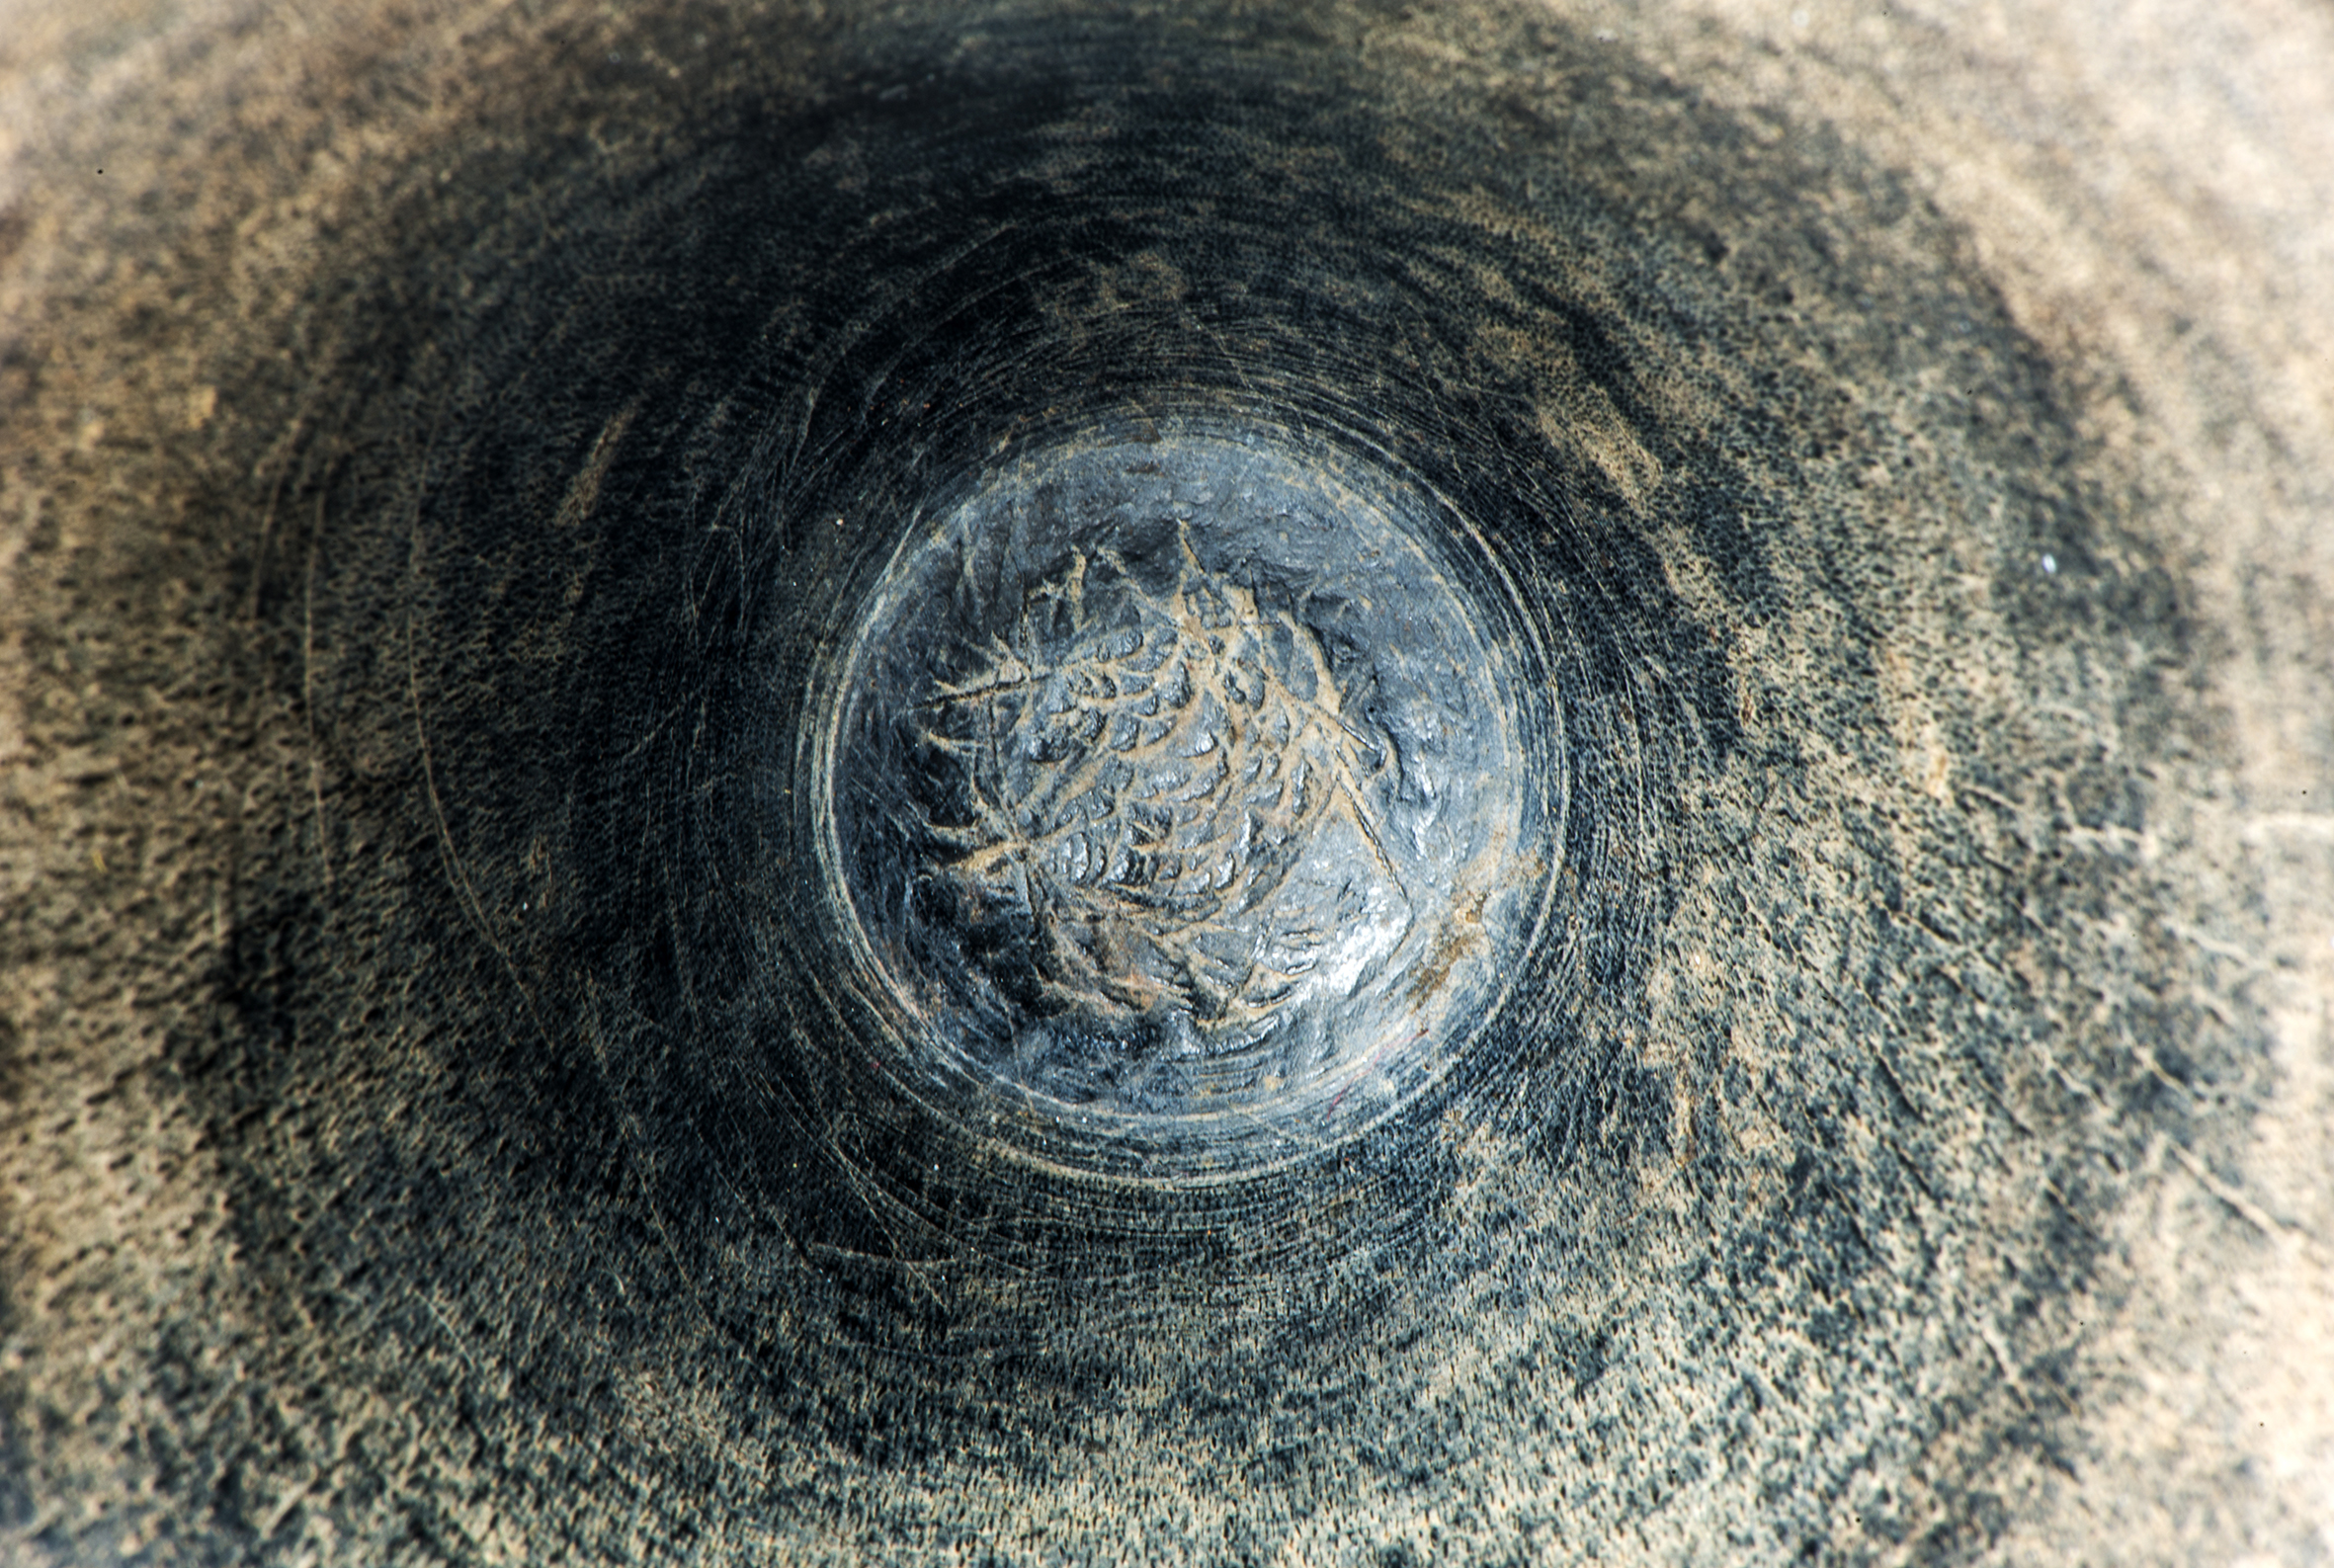 Figure 3: Micrograph of the cup’s bottom showing traces left by the manufacturing process (lathe). Photo E. Disner.